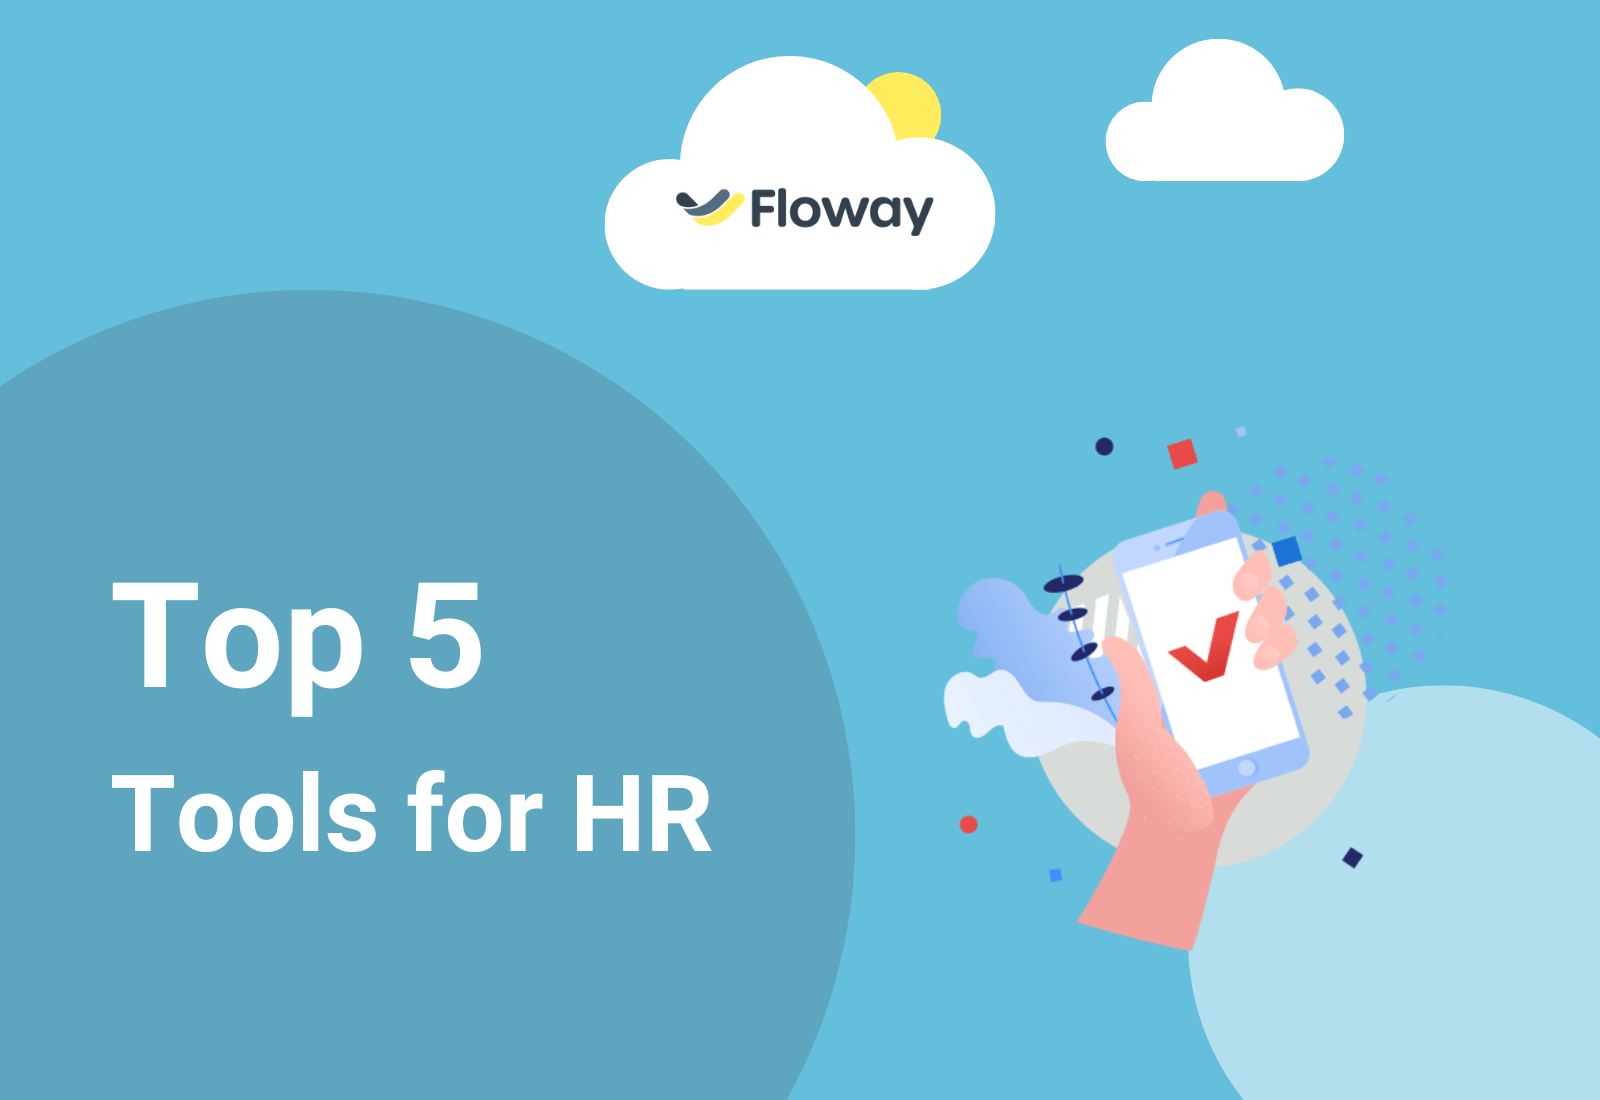 Top 5 tools for HR - Floway workflow